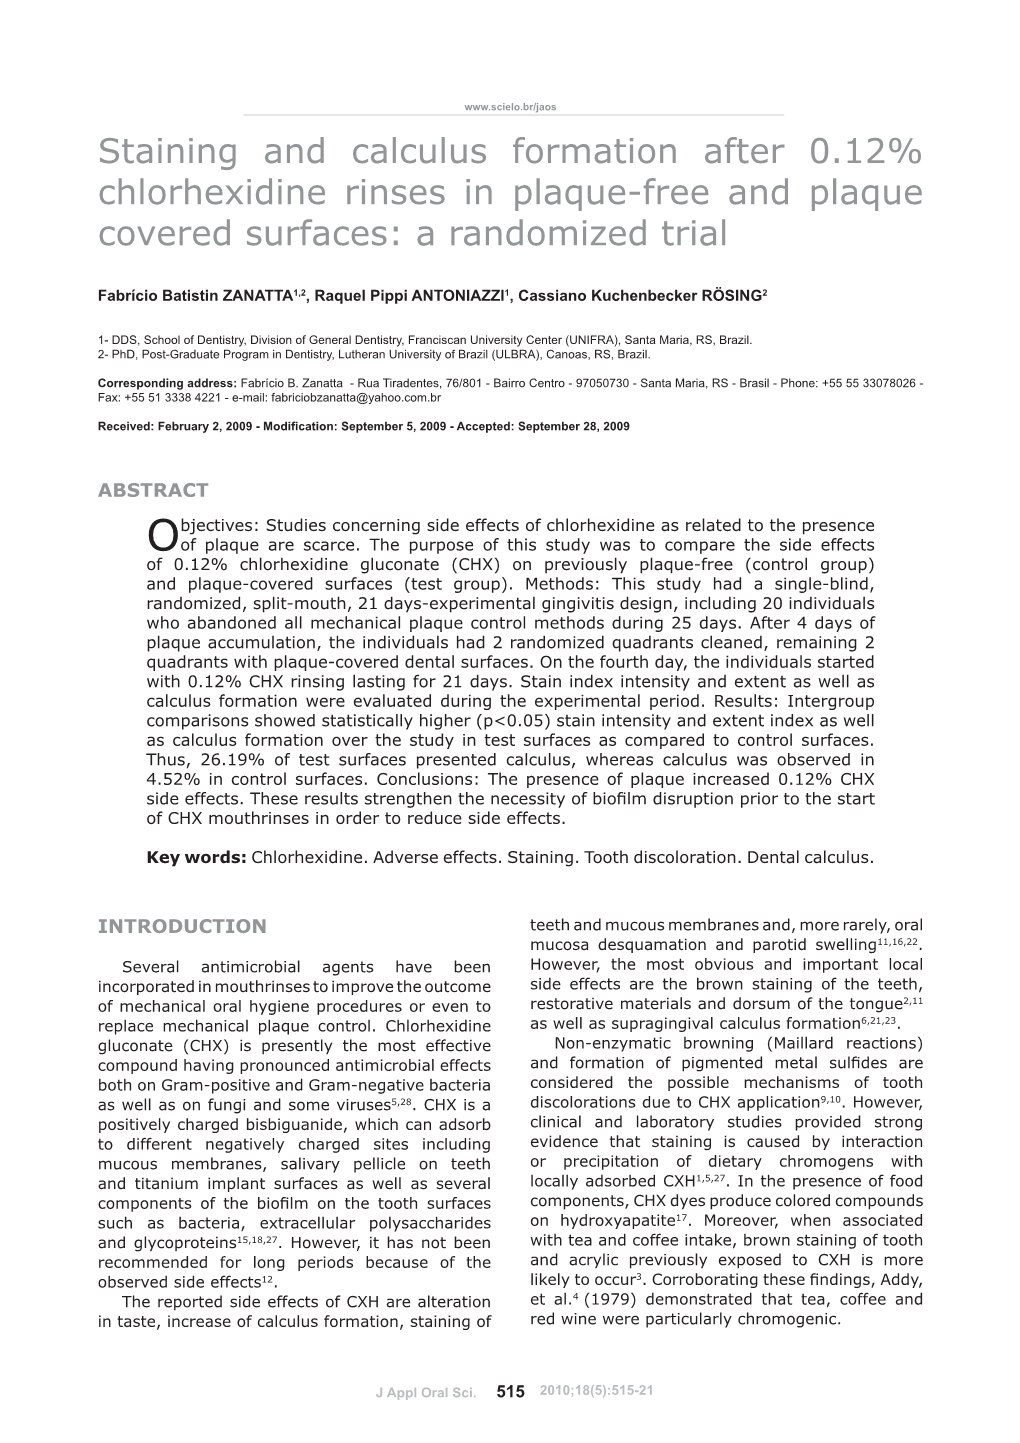 Staining and Calculus Formation After 0.12% Chlorhexidine Rinses in Plaque-Free and Plaque Covered Surfaces: a Randomized Trial